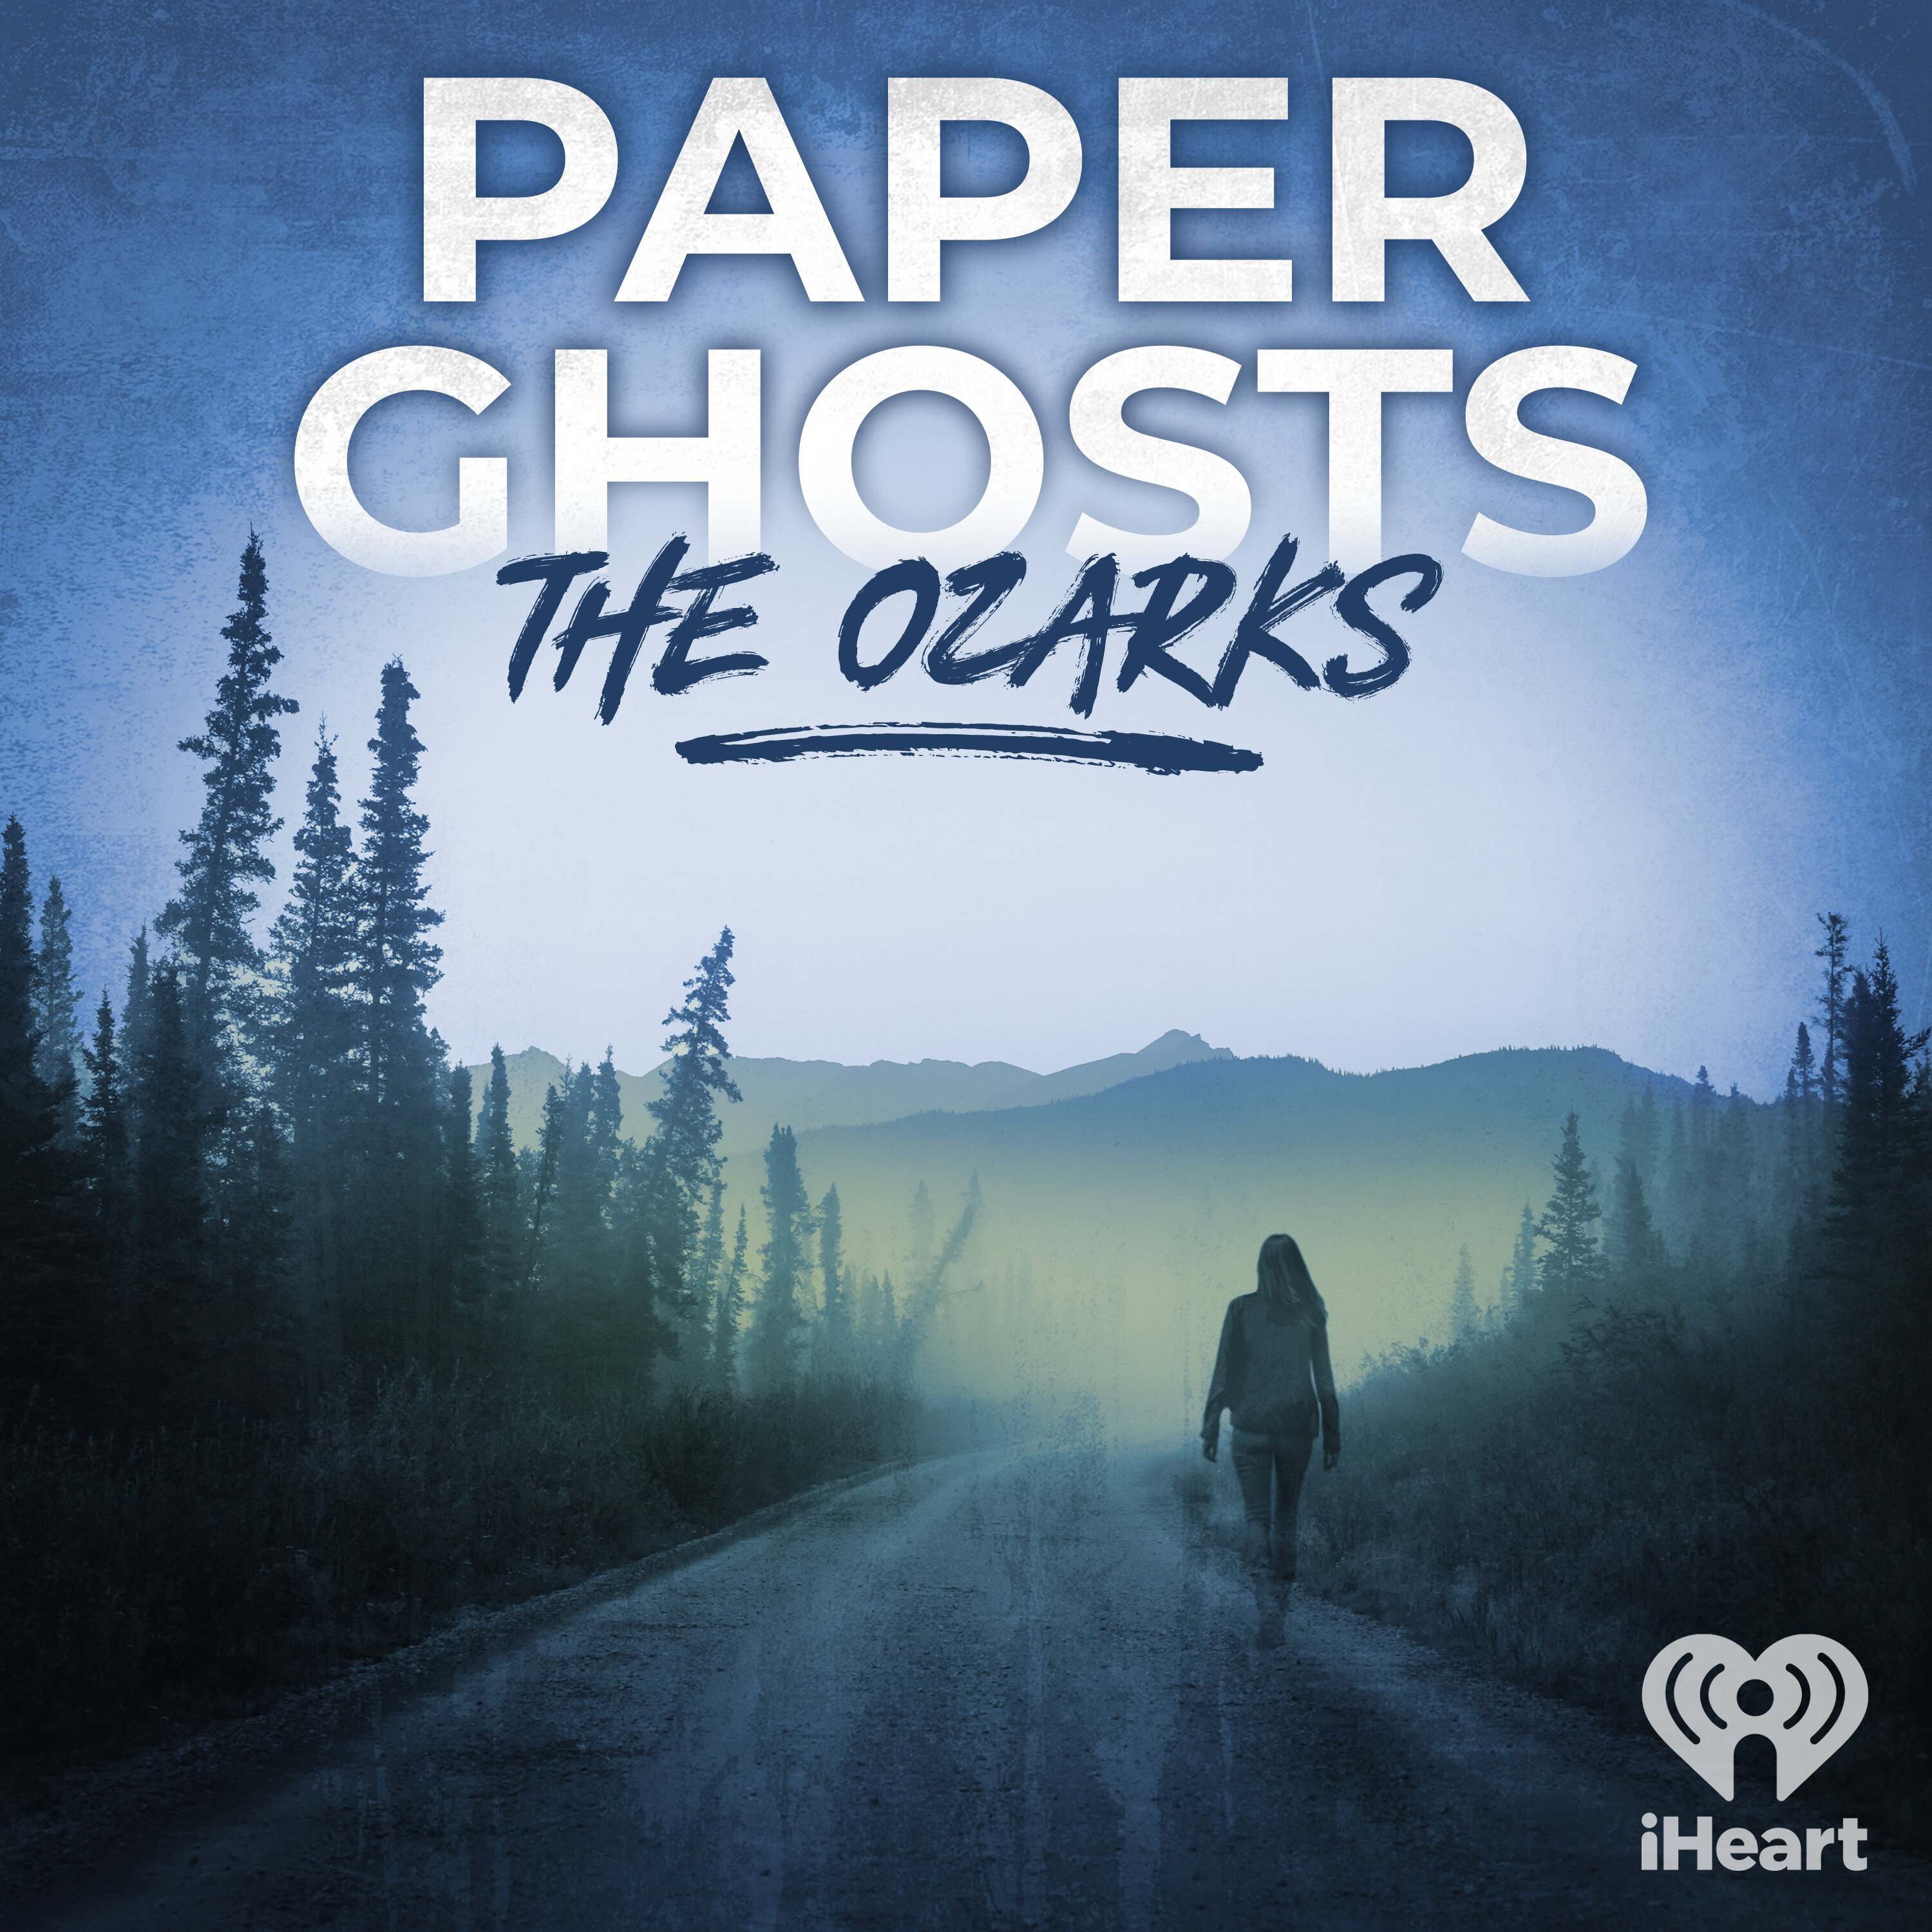 Introducing - Paper Ghosts Season 4: The Ozarks by iHeartPodcasts